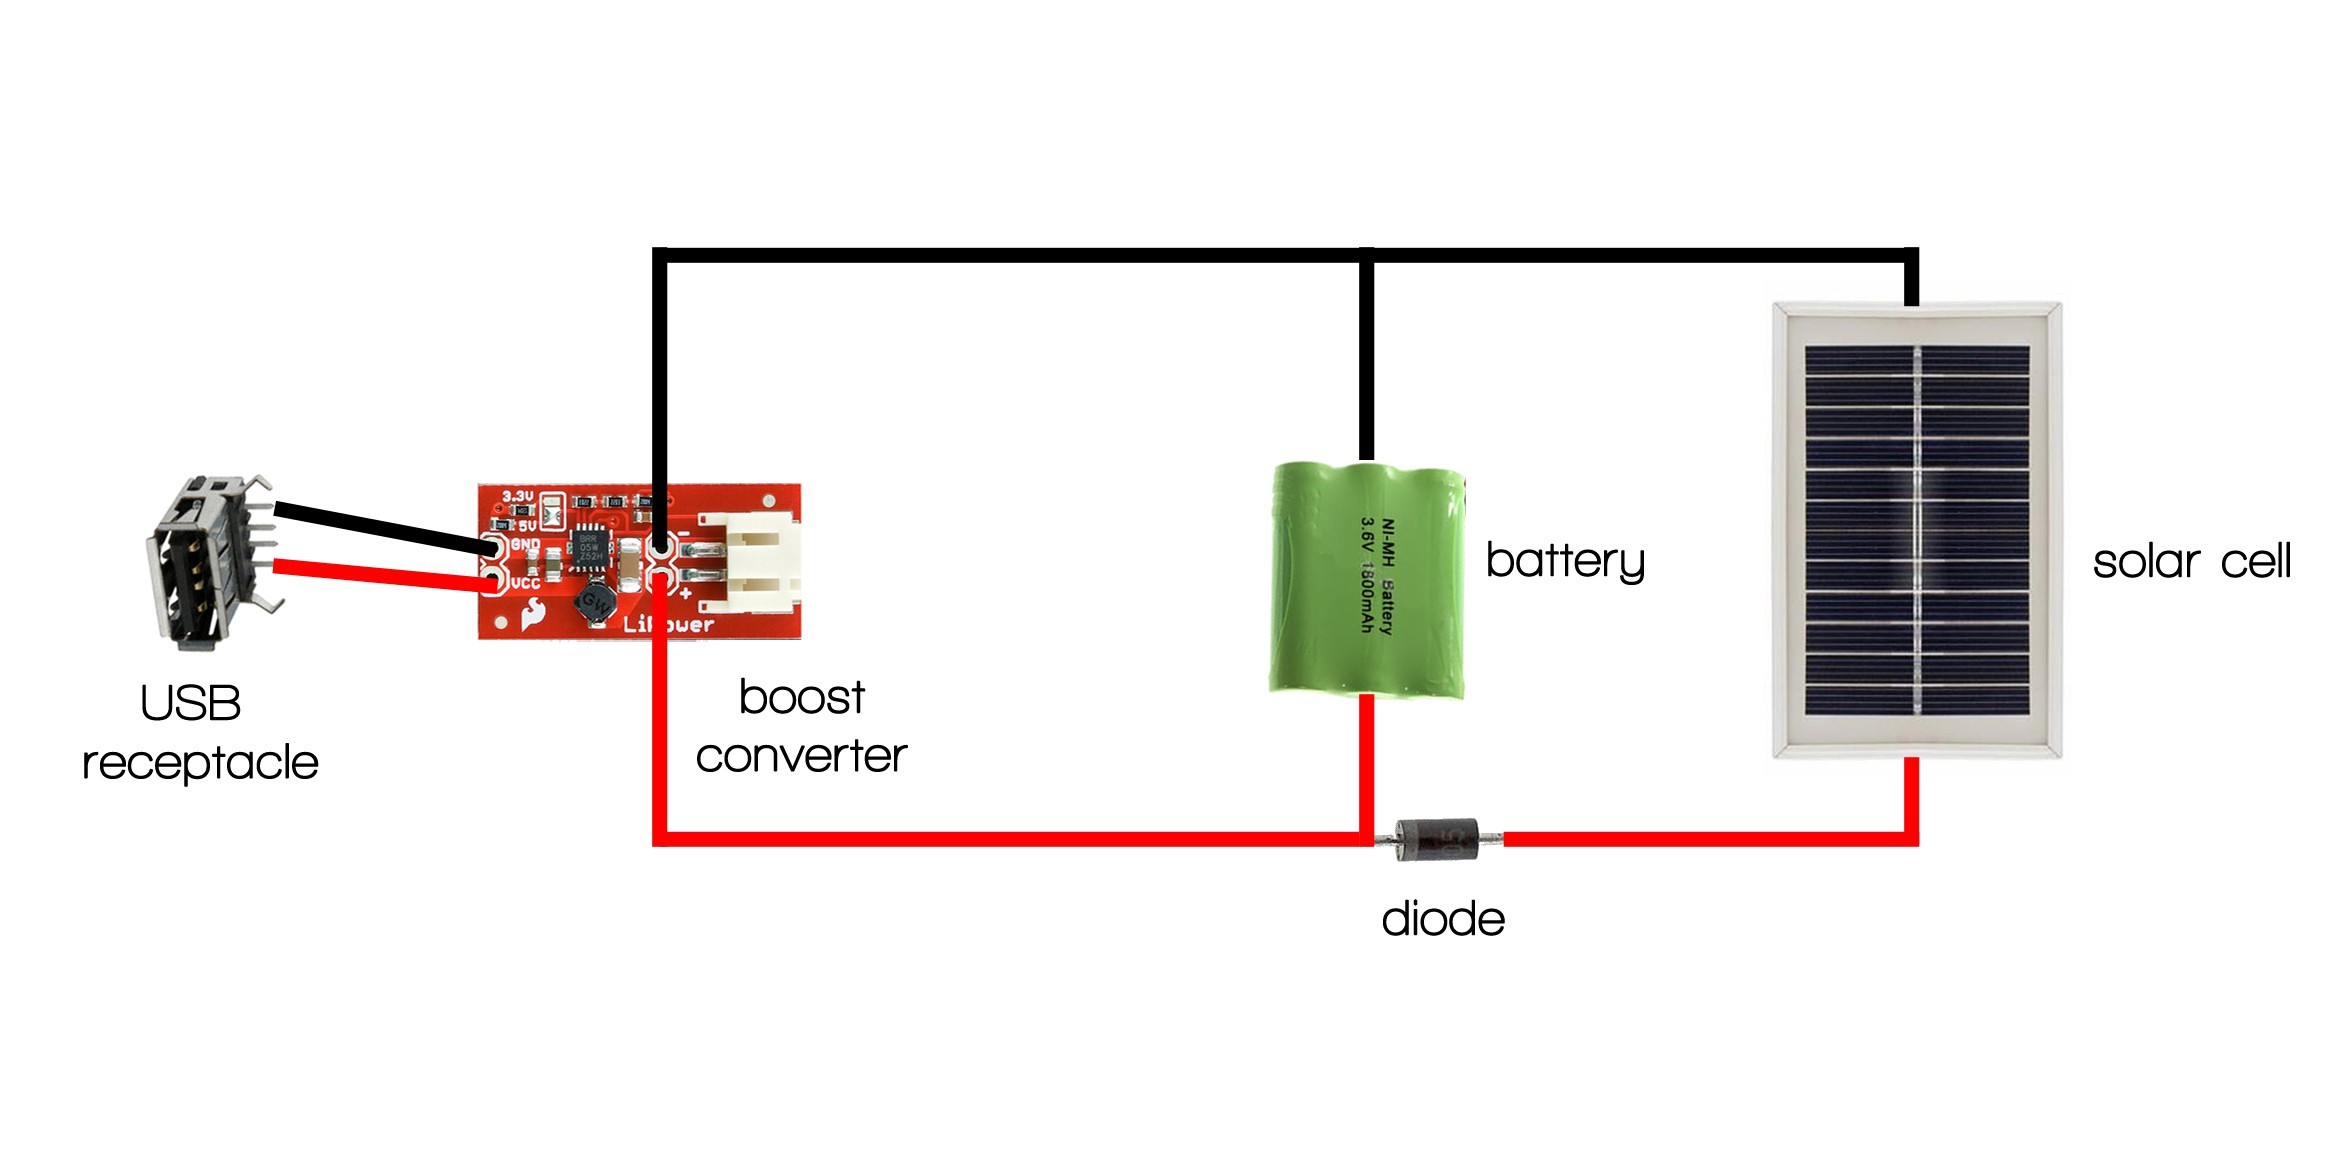 Cell Phone Charger Circuit Diagram Elegant Led Emergency Light Circuit with Battery Over Charge Protection P1